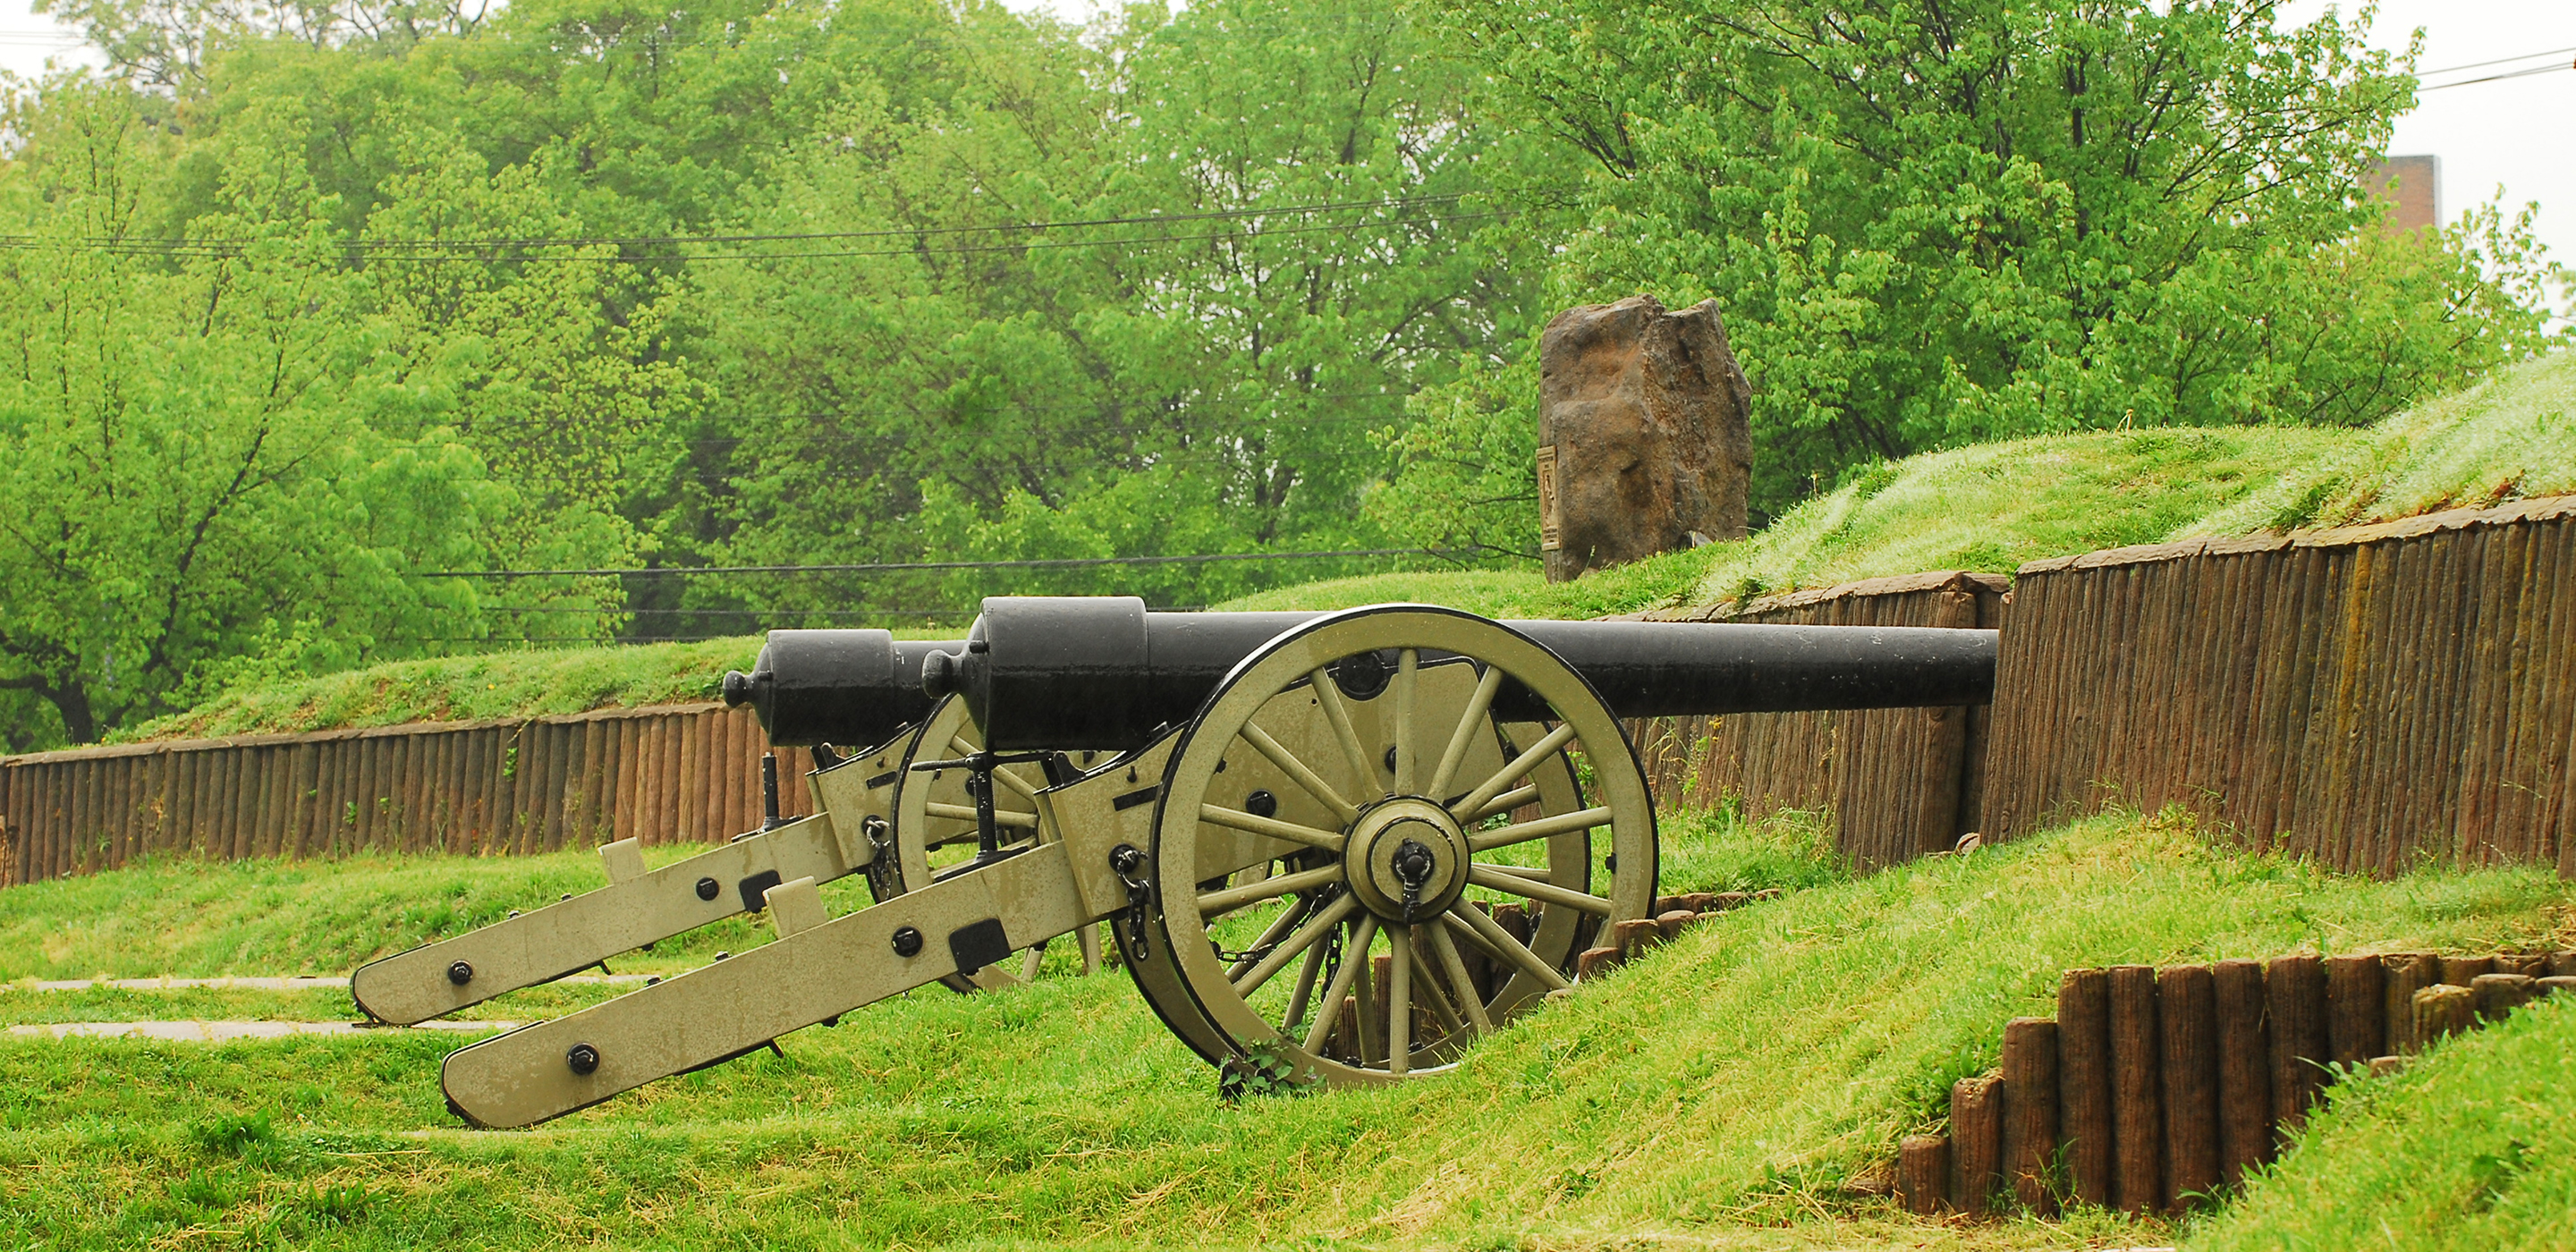 Photograph of two civil-war era cannons placed behind the grass covered ramparts of a brick fort.